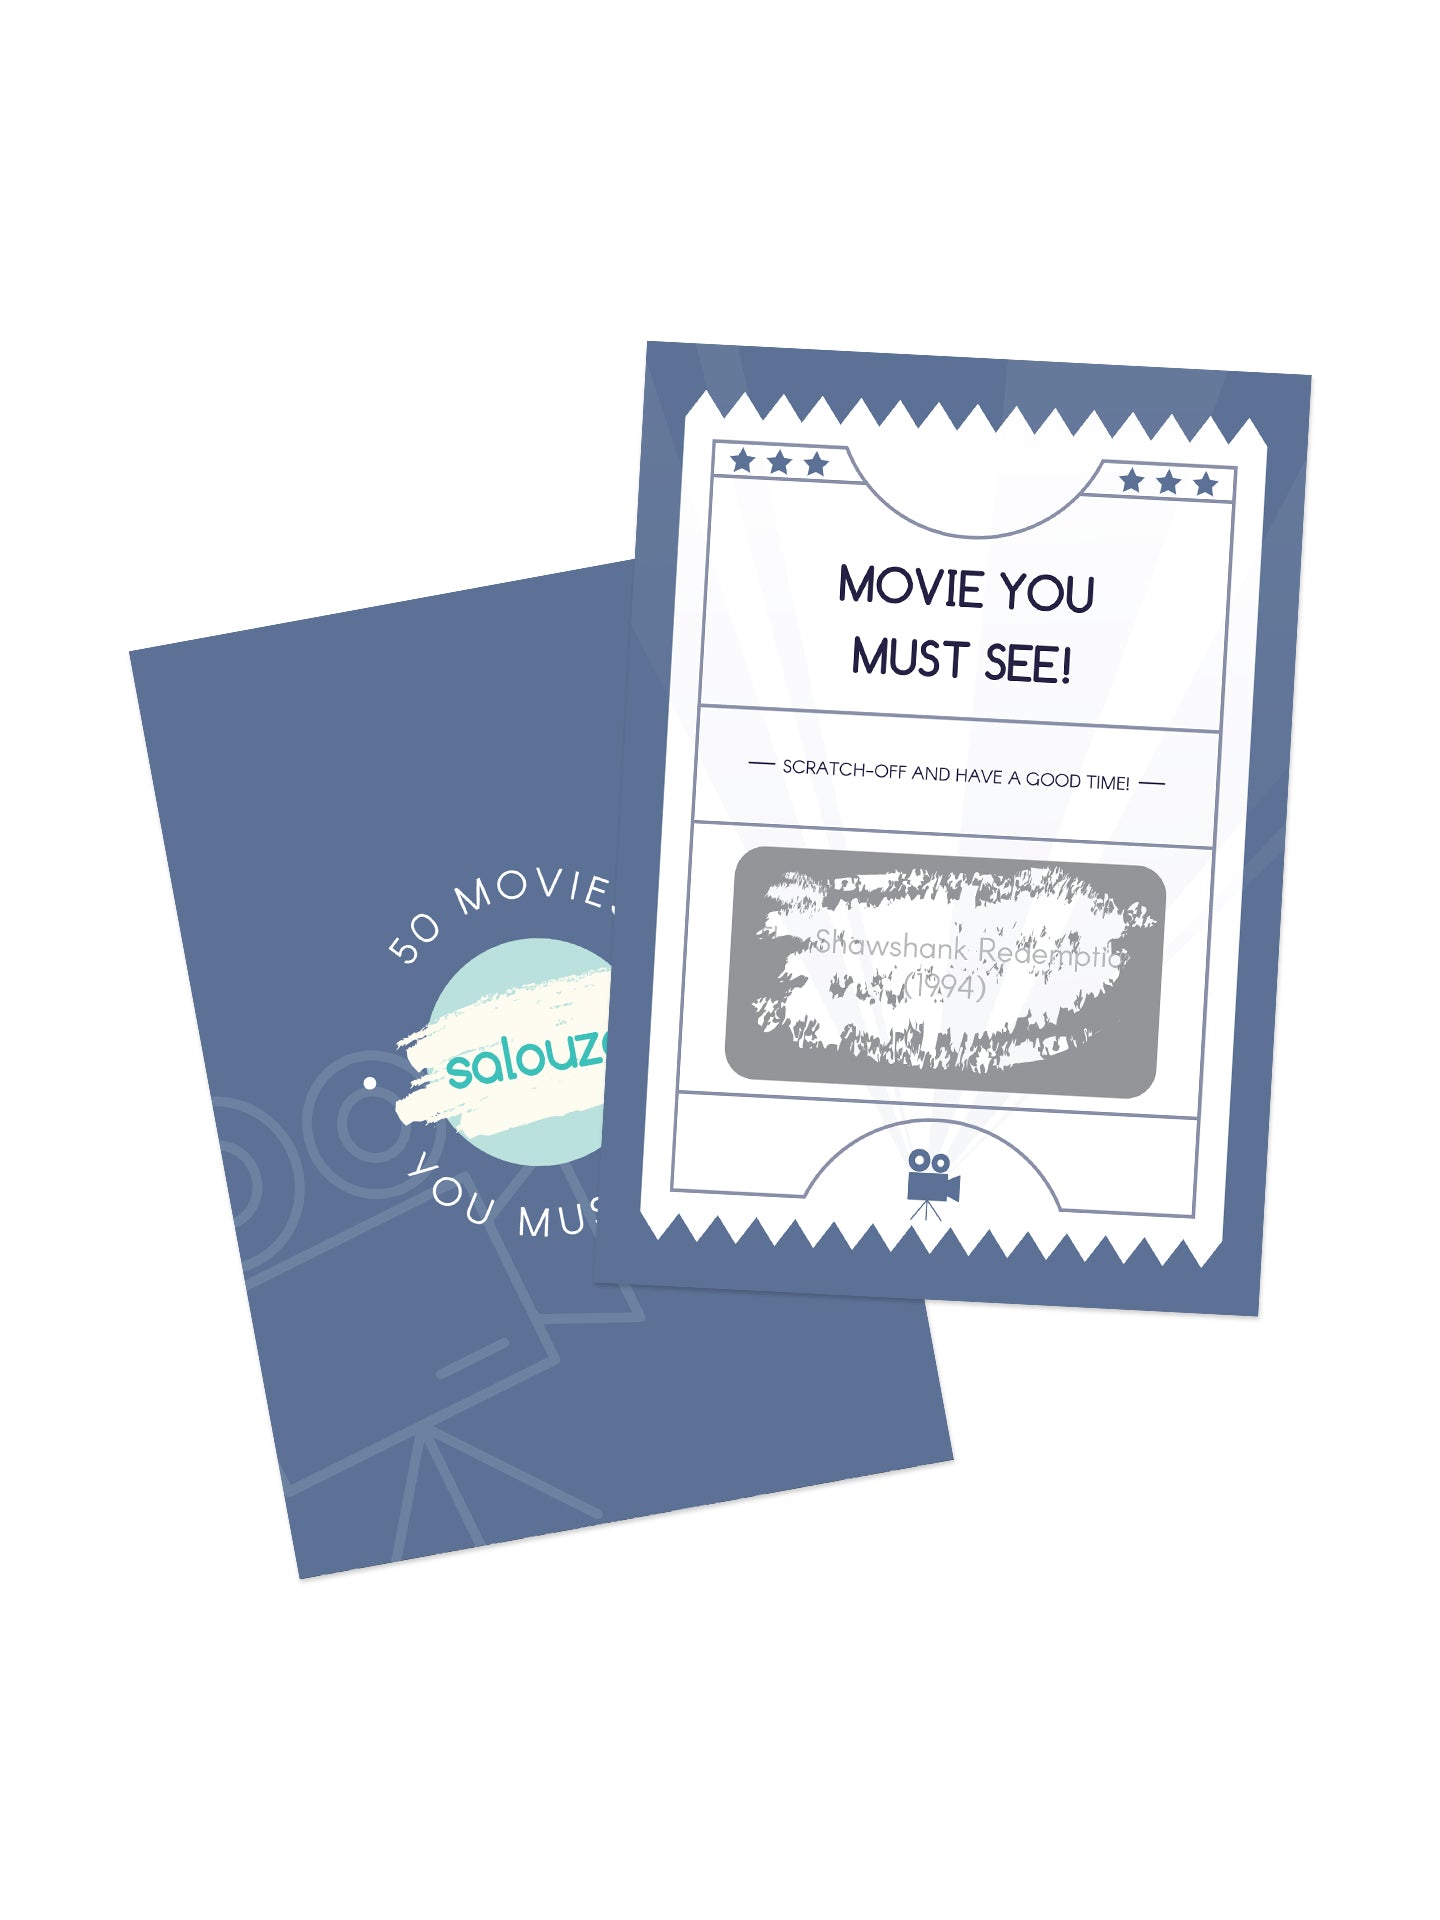 Scratch-off cards set "Perfect date" and "Movies you must see"